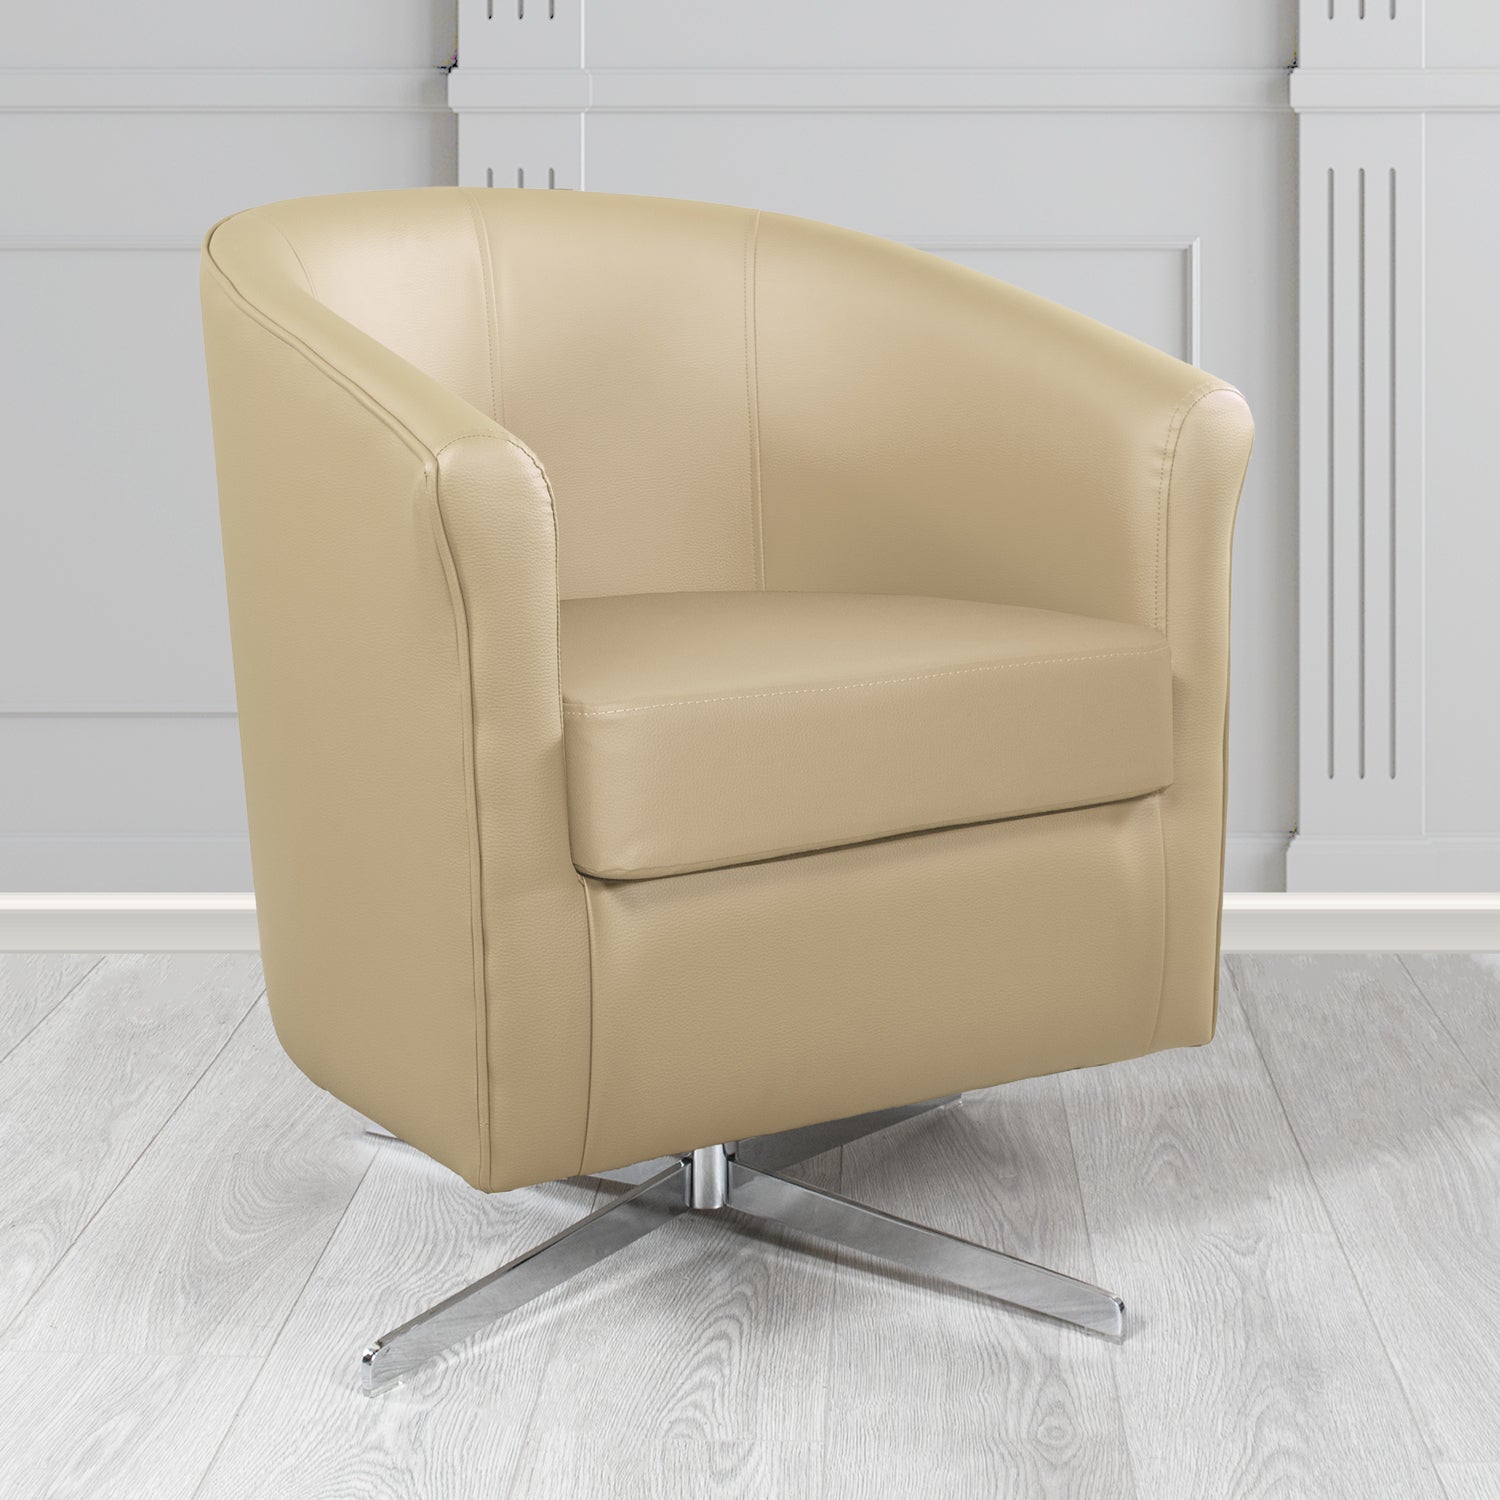 Cannes Swivel Tub Chair in Just Colour Almond Crib 5 Faux Leather